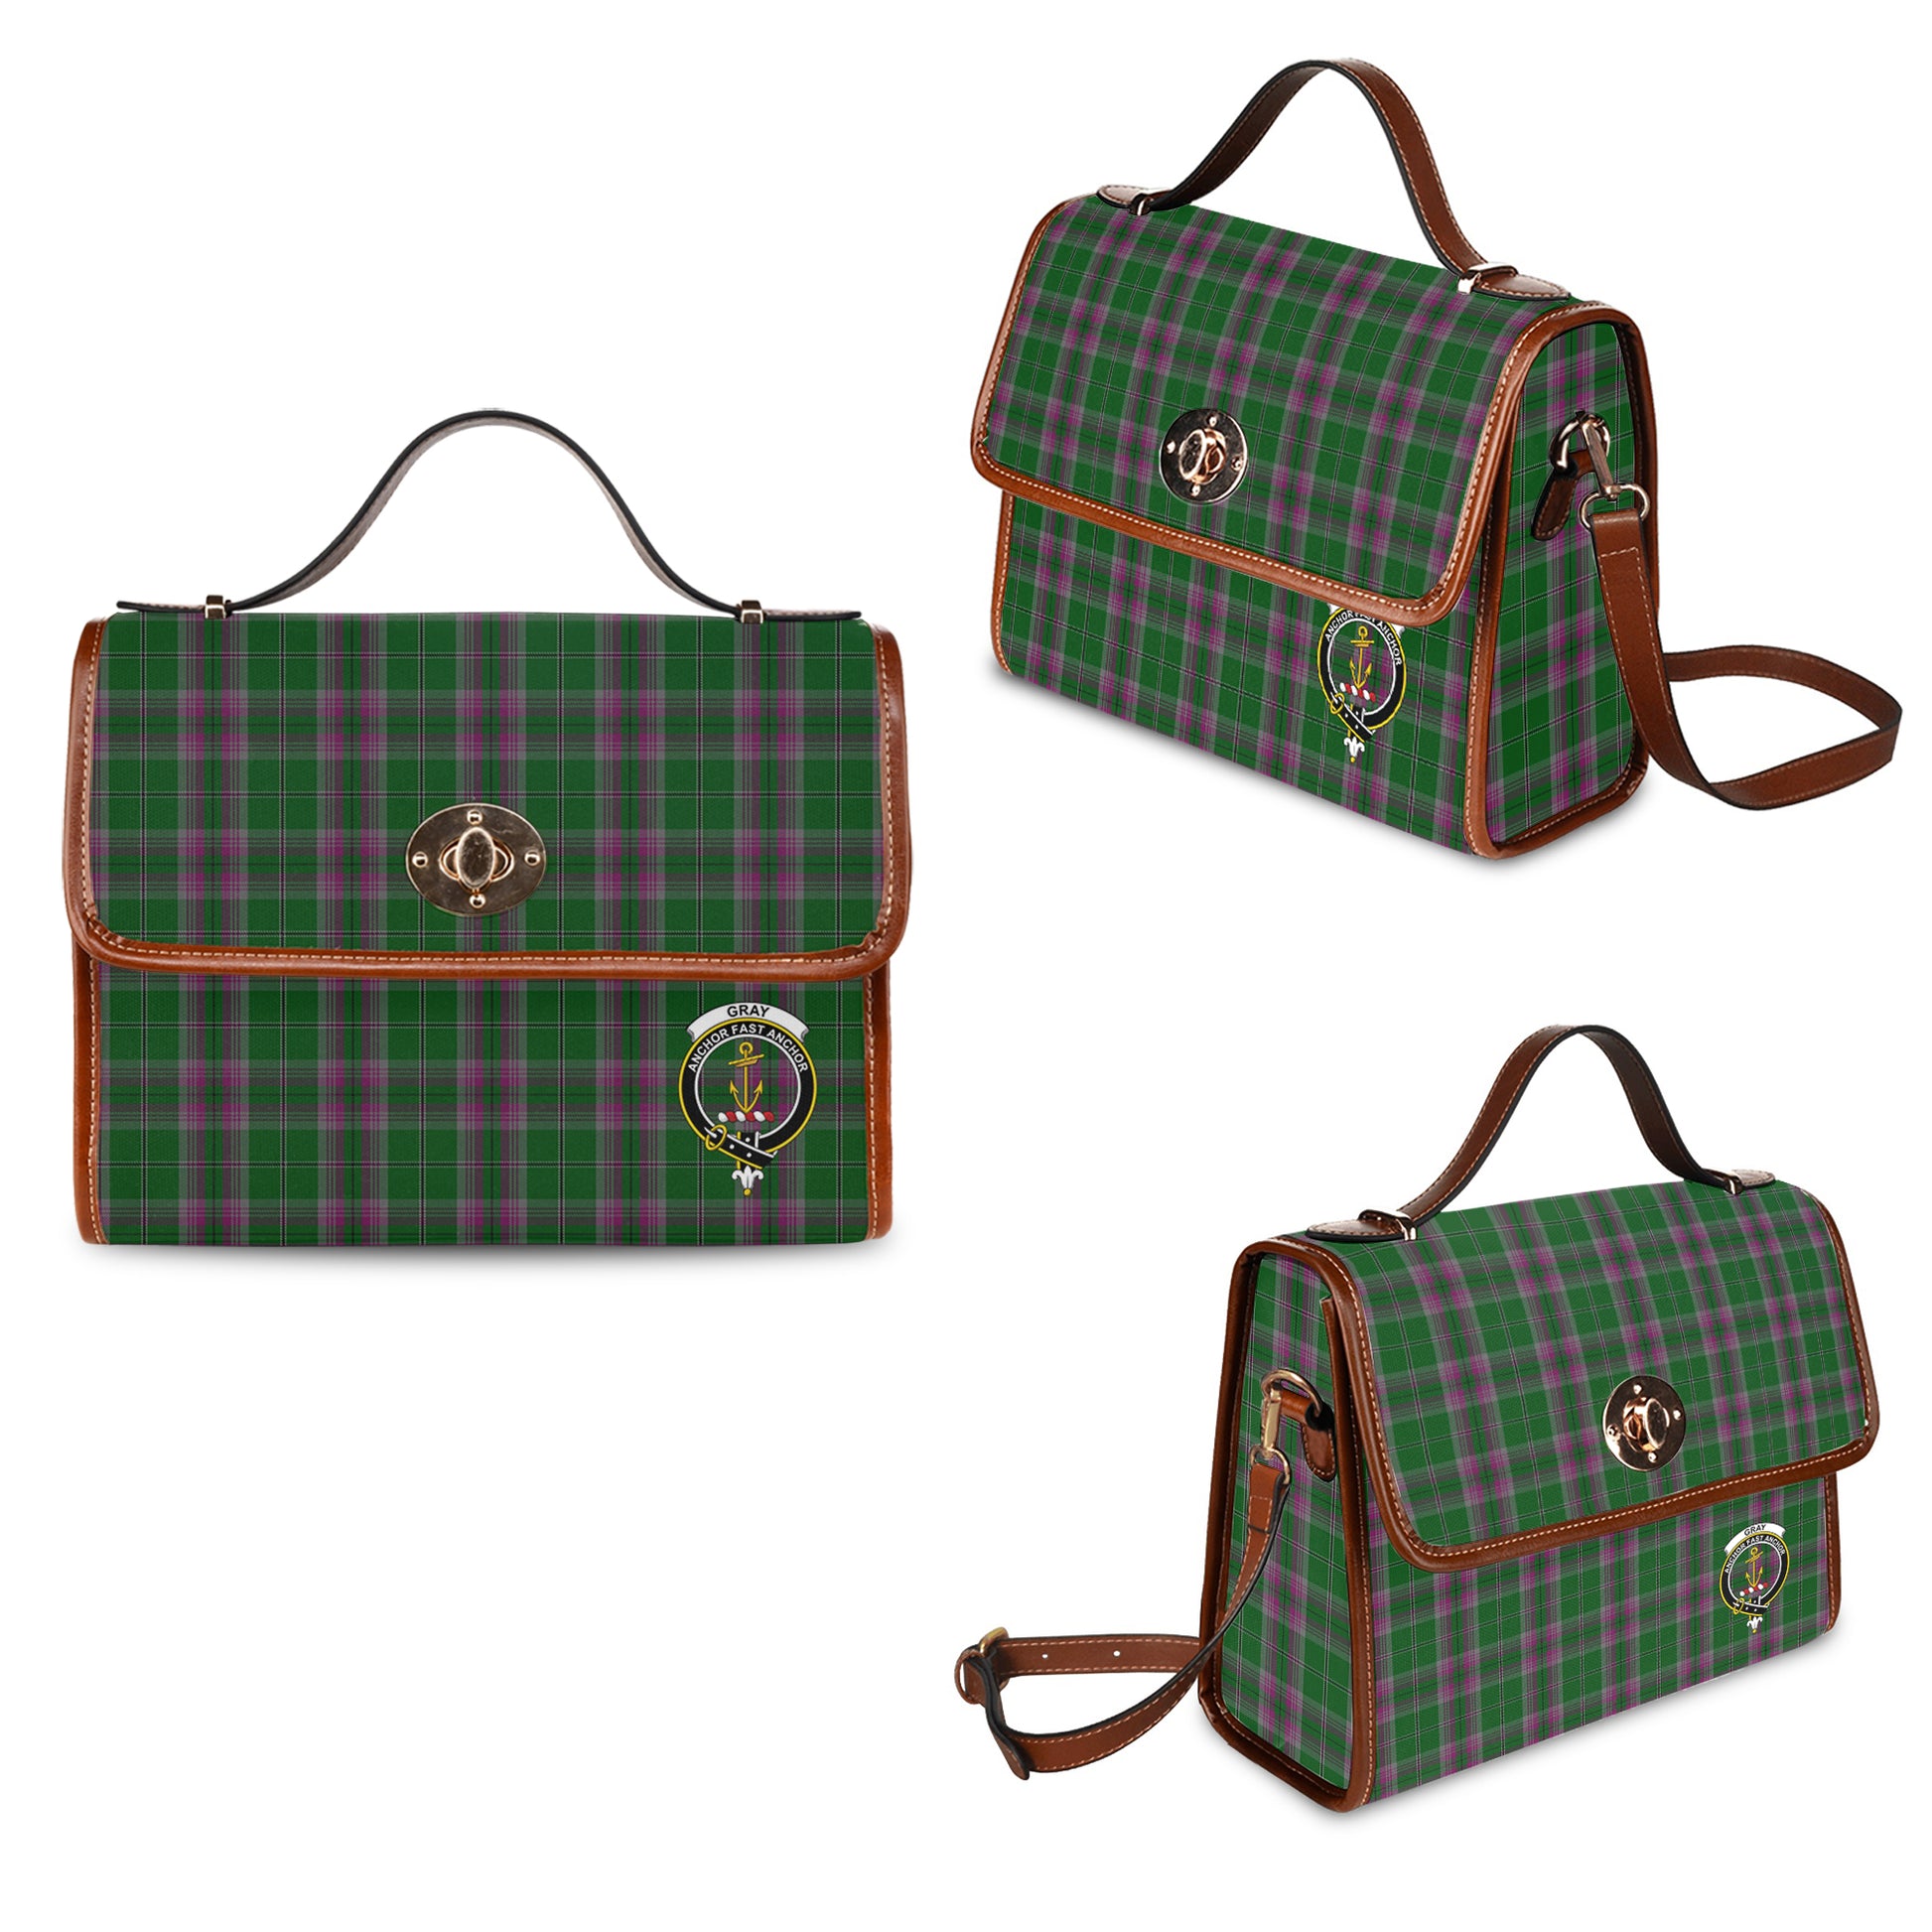 gray-hunting-tartan-leather-strap-waterproof-canvas-bag-with-family-crest